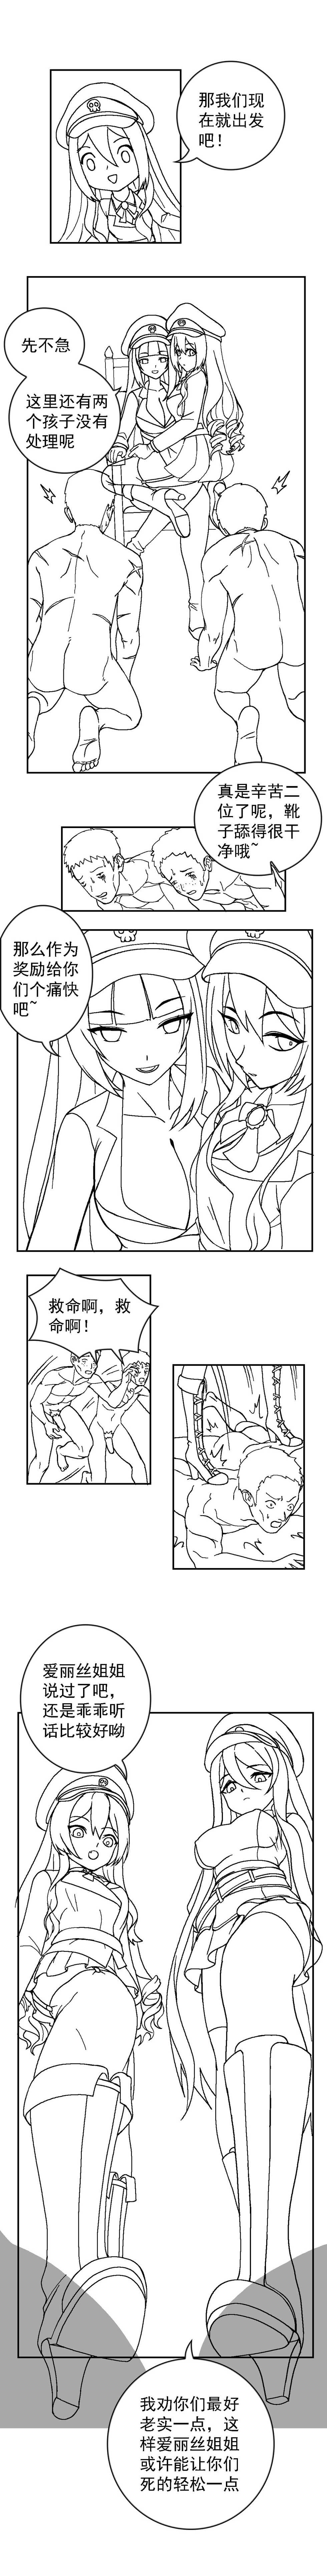 [Weixiefashi] [Black-and-white]The Cruel Empire Executioners  [帝国处刑官爱丽丝2：残酷的处刑天使][黑白] - Page 5